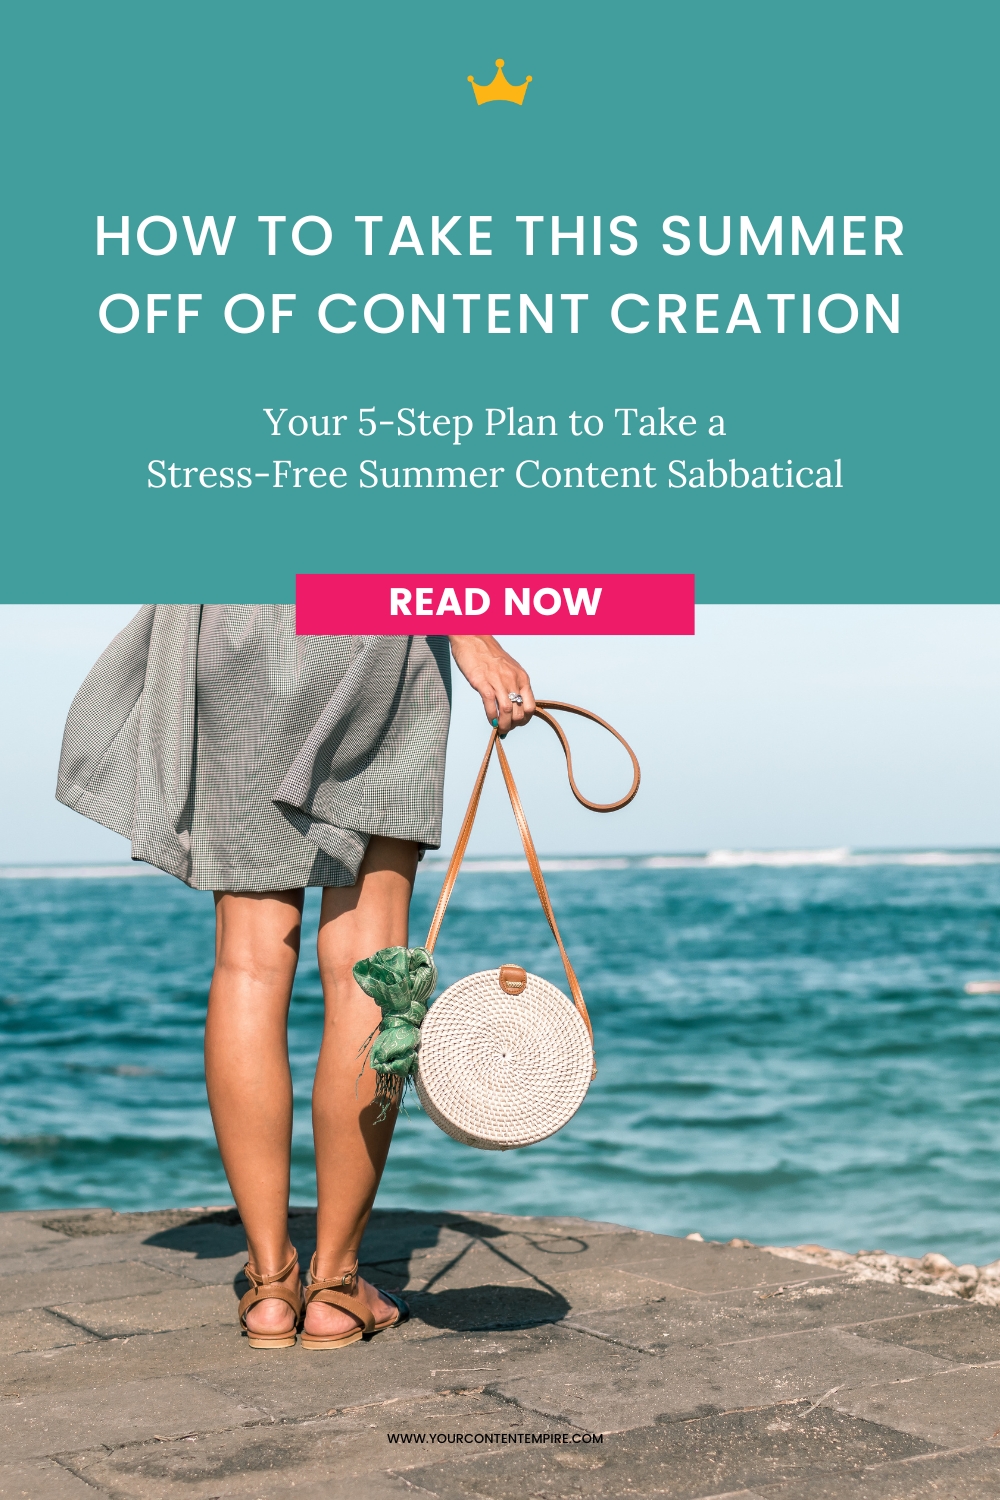 How to Take This Summer OFF of Content Creation by Your Content Empire